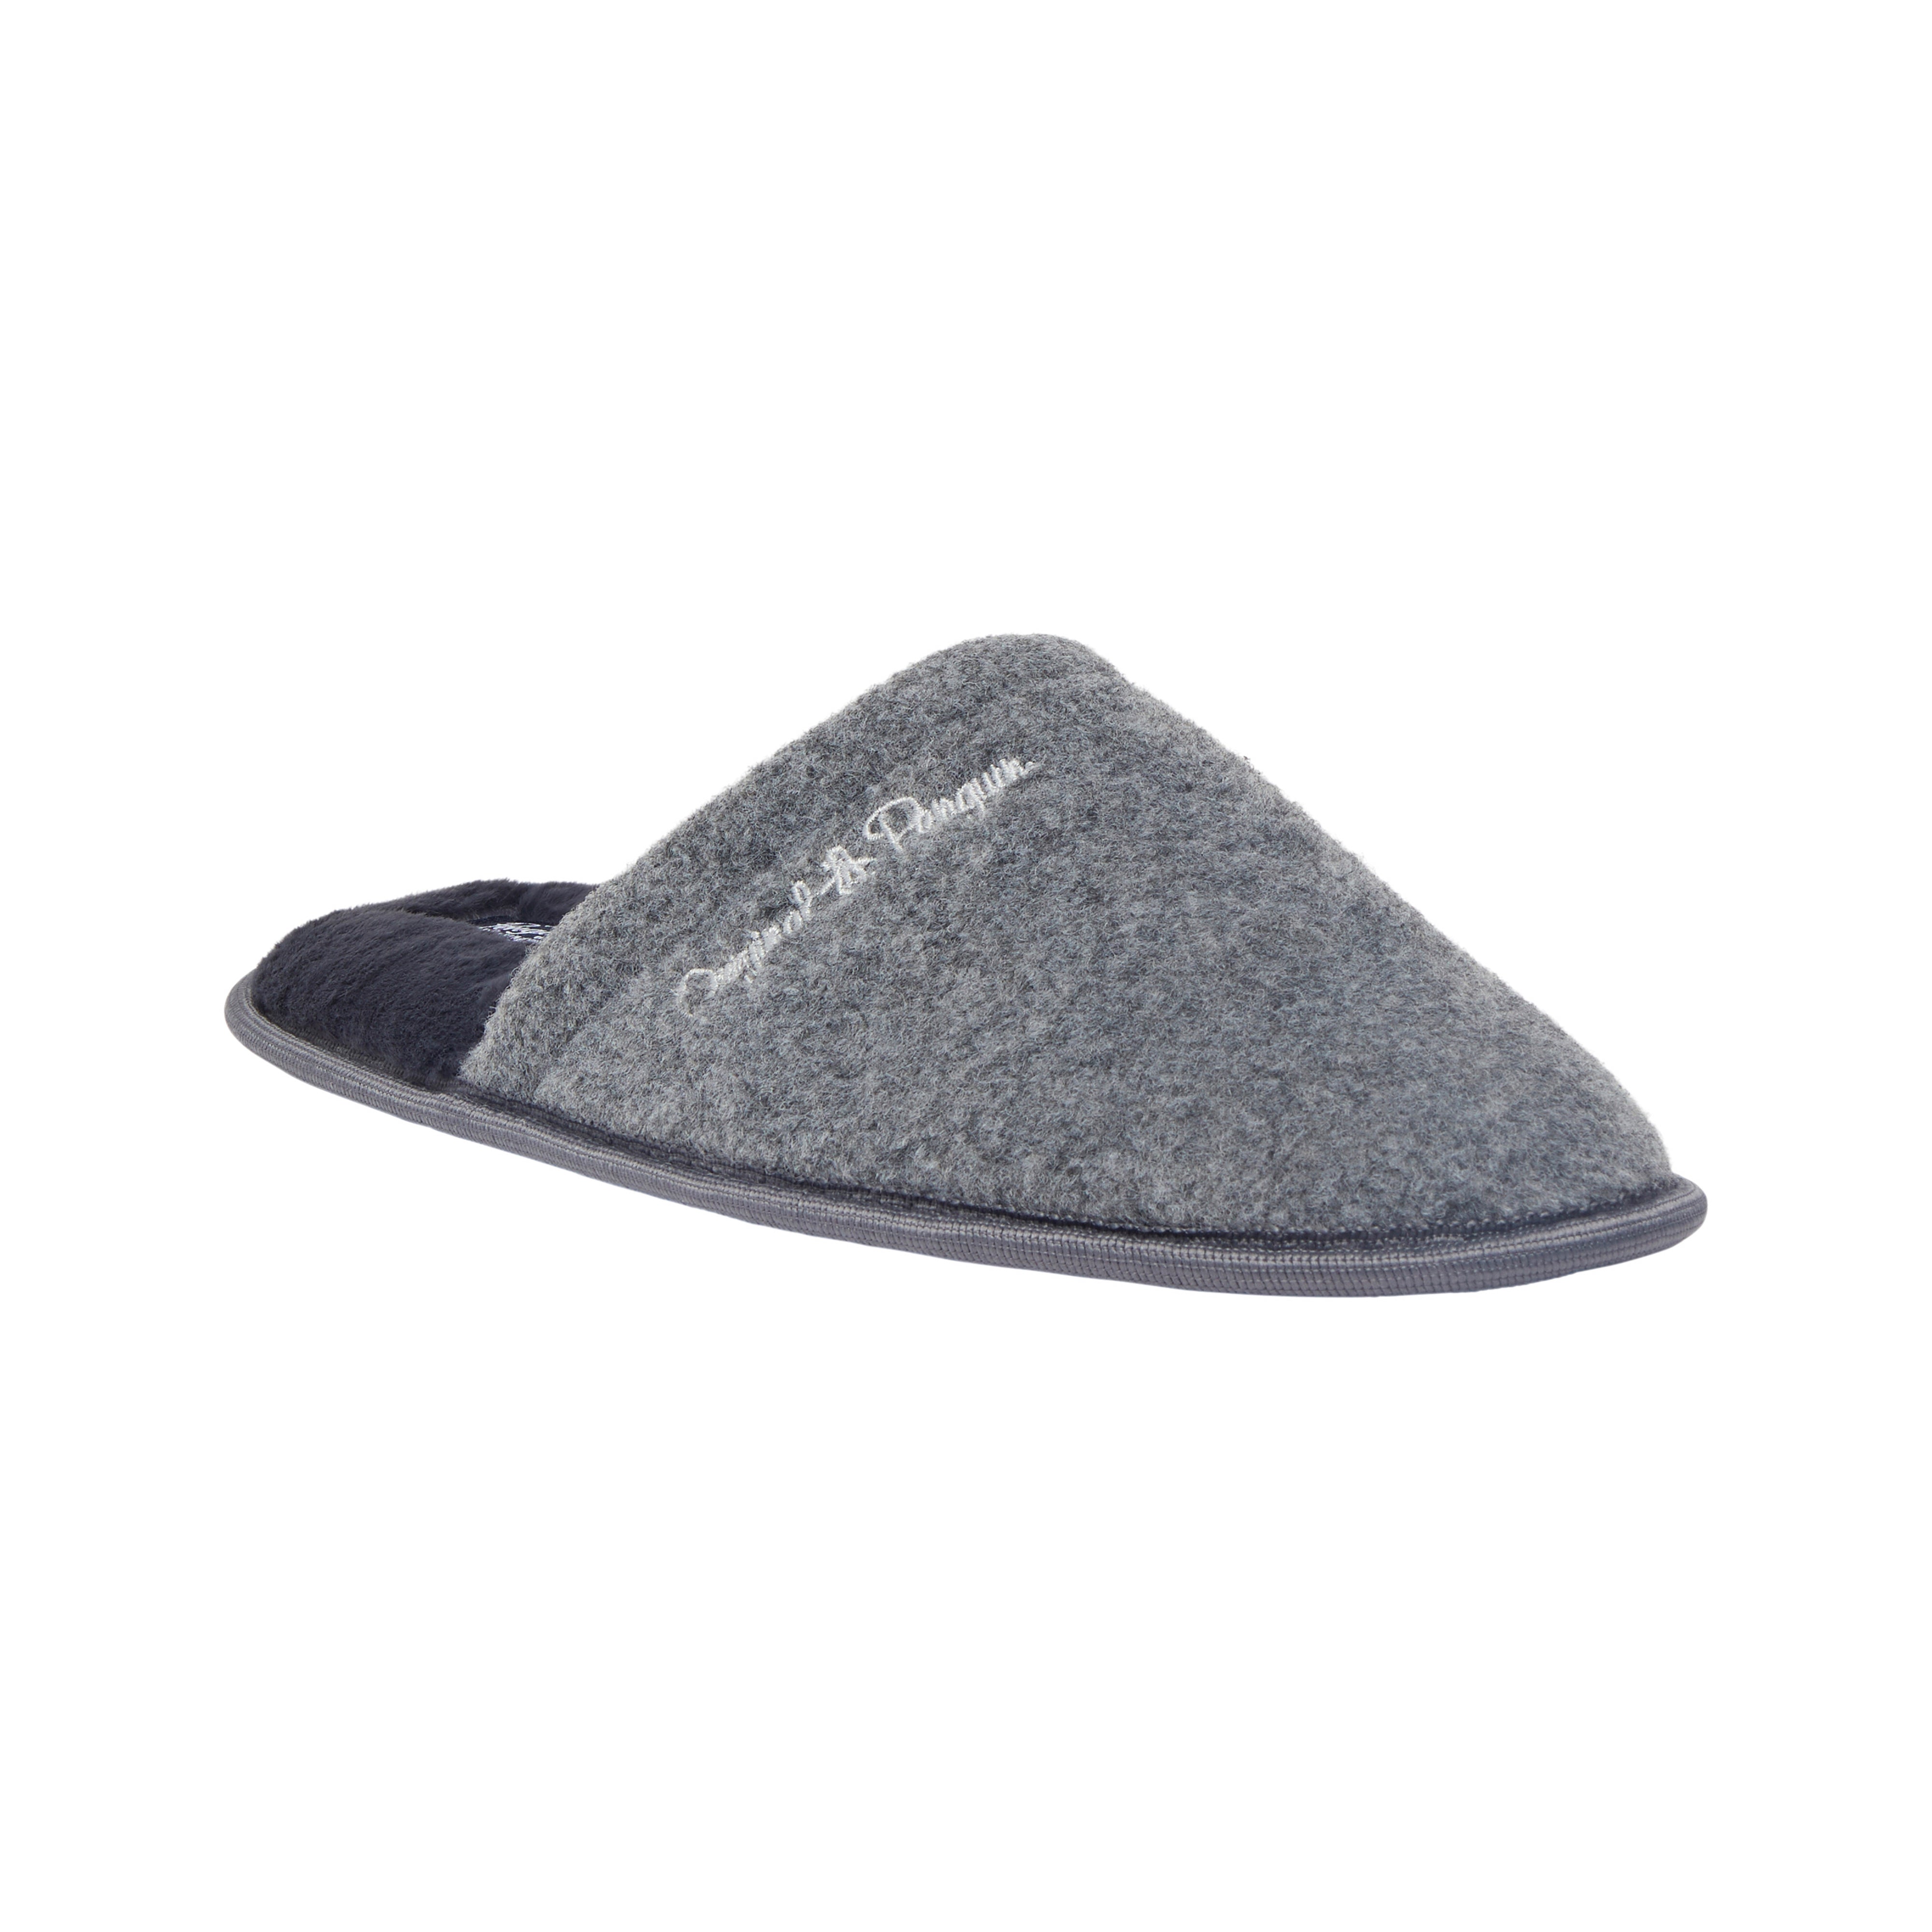 View Baloo Slipper In Charcoal Gray information